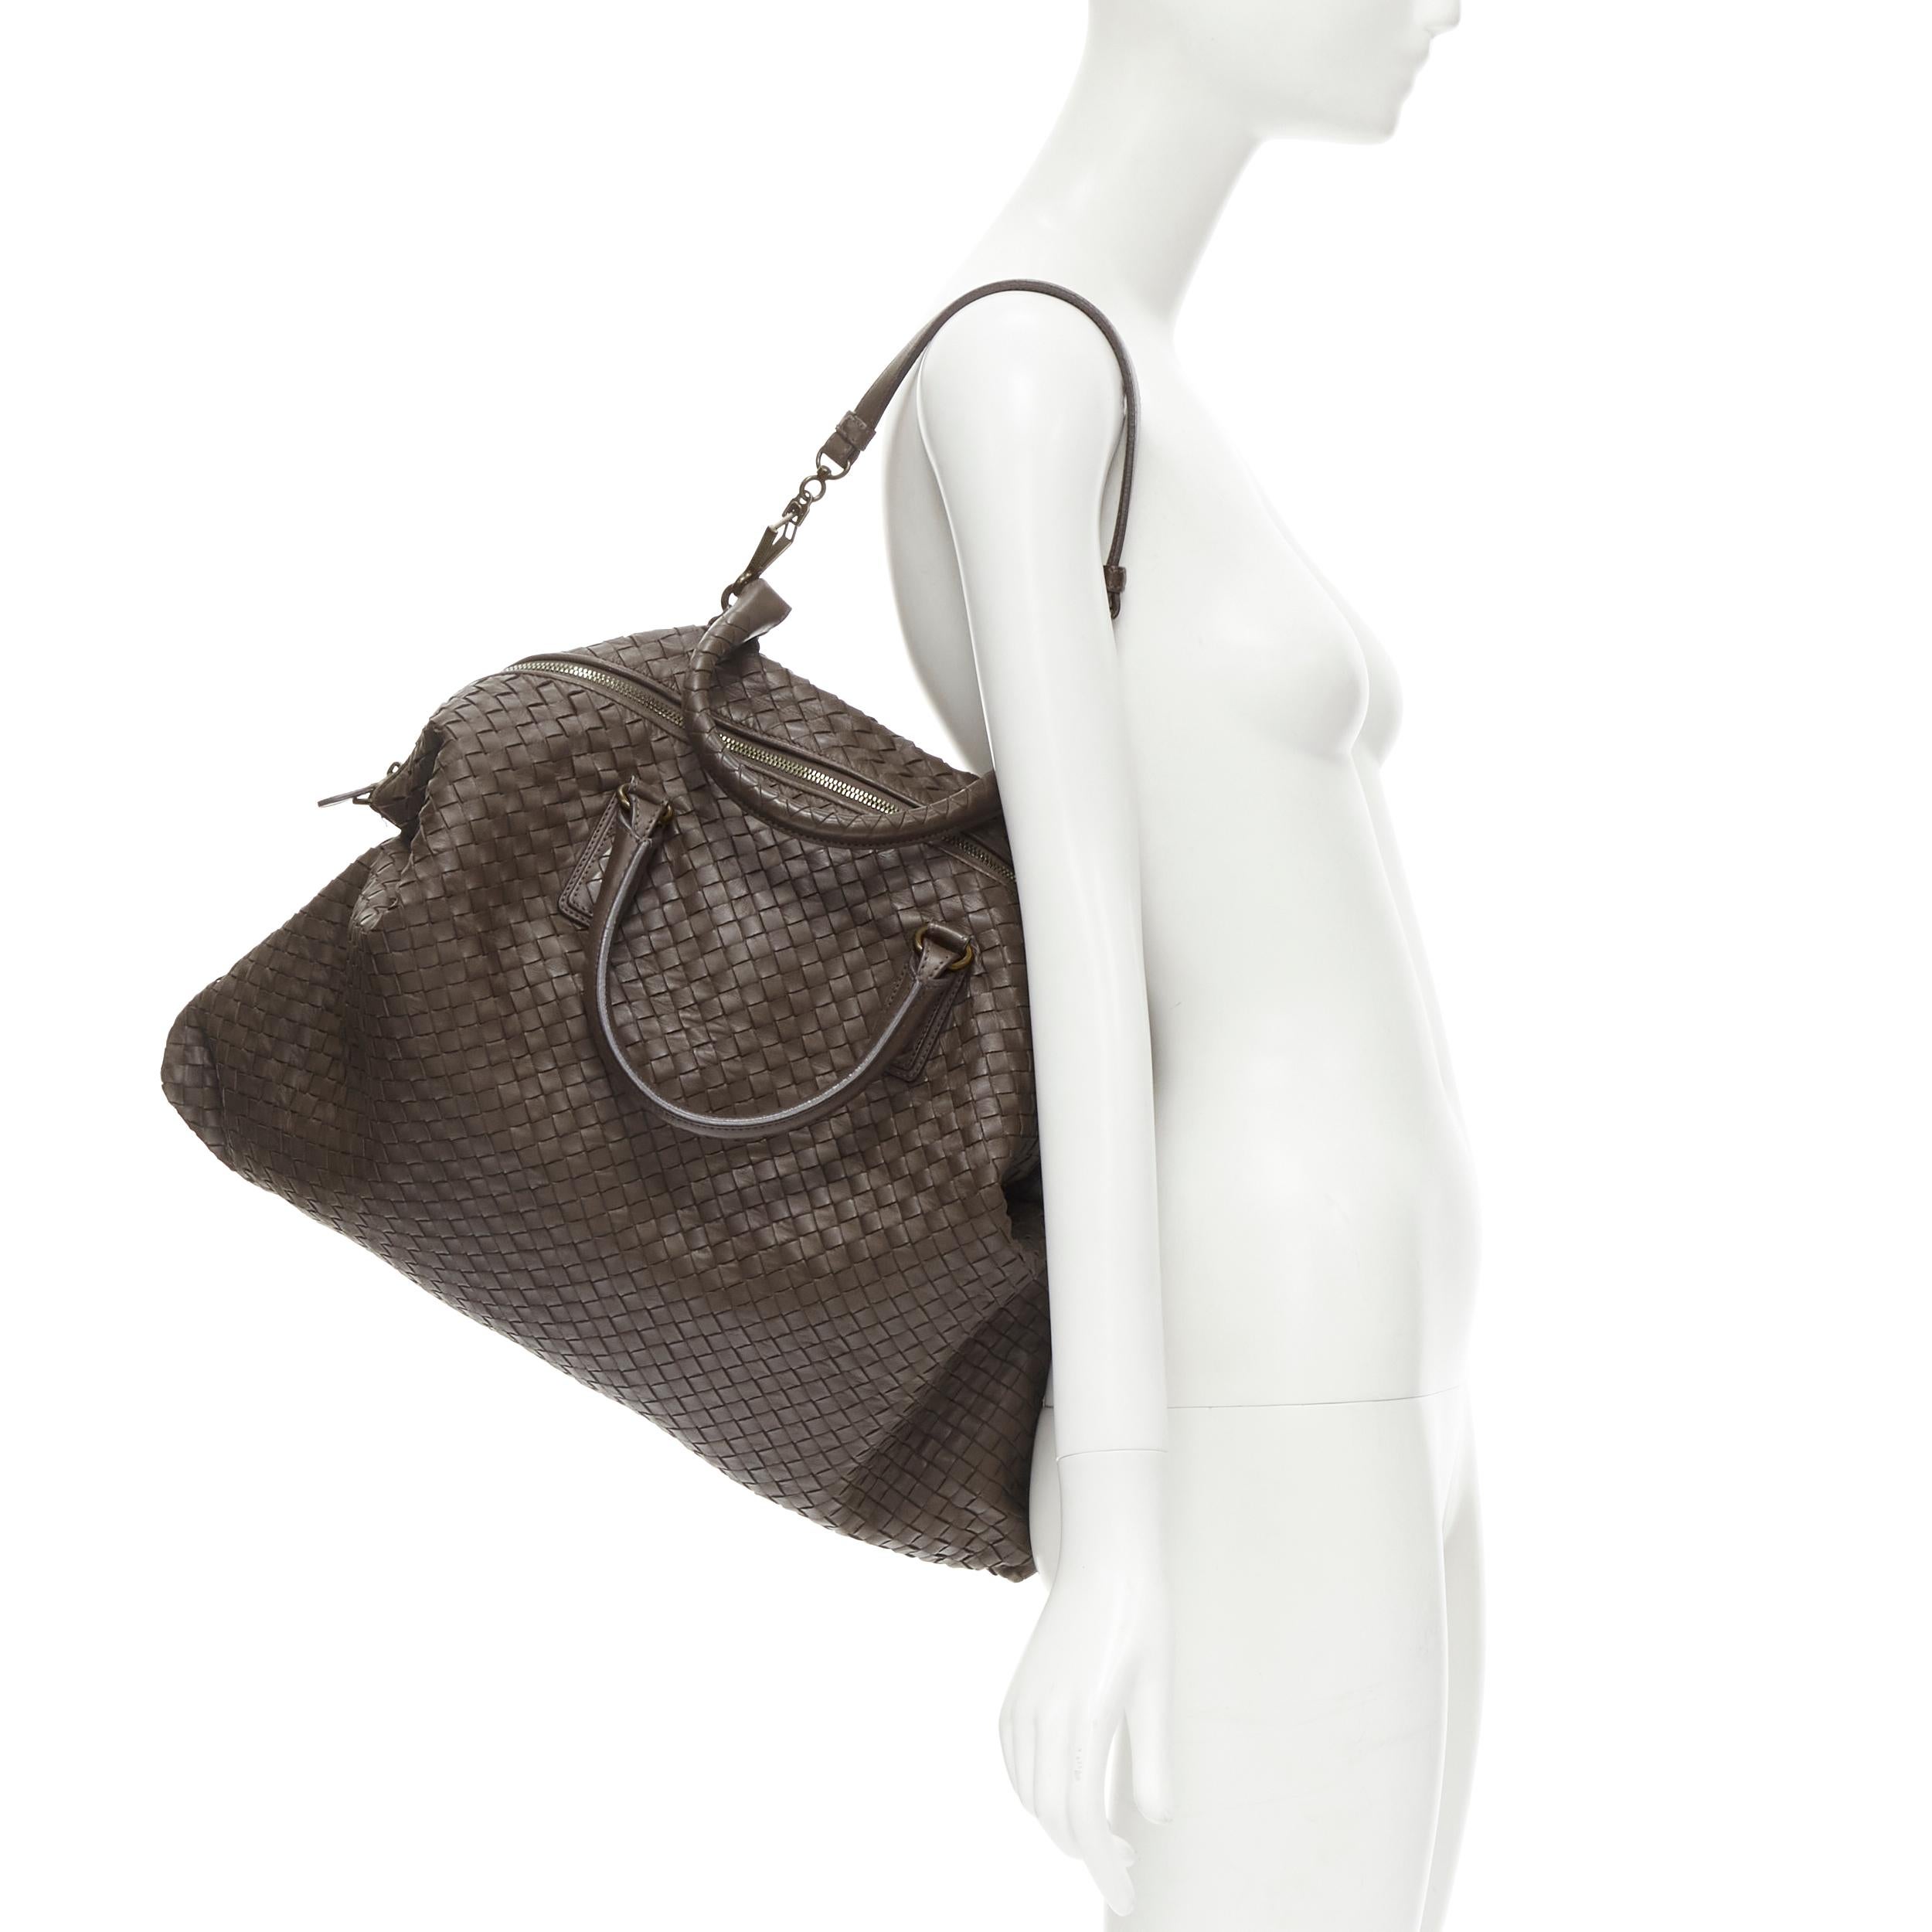 BOTTEGA VENETA Intrecciato brown woven leather pinched side large tote bag 
Reference: LNKO/A01972 
Brand: Bottega Veneta 
Material: Leather 
Color: Brown 
Pattern: Solid 
Closure: Zip 
Extra Detail: Gold-tone hardware. Rolled handle. Detachable